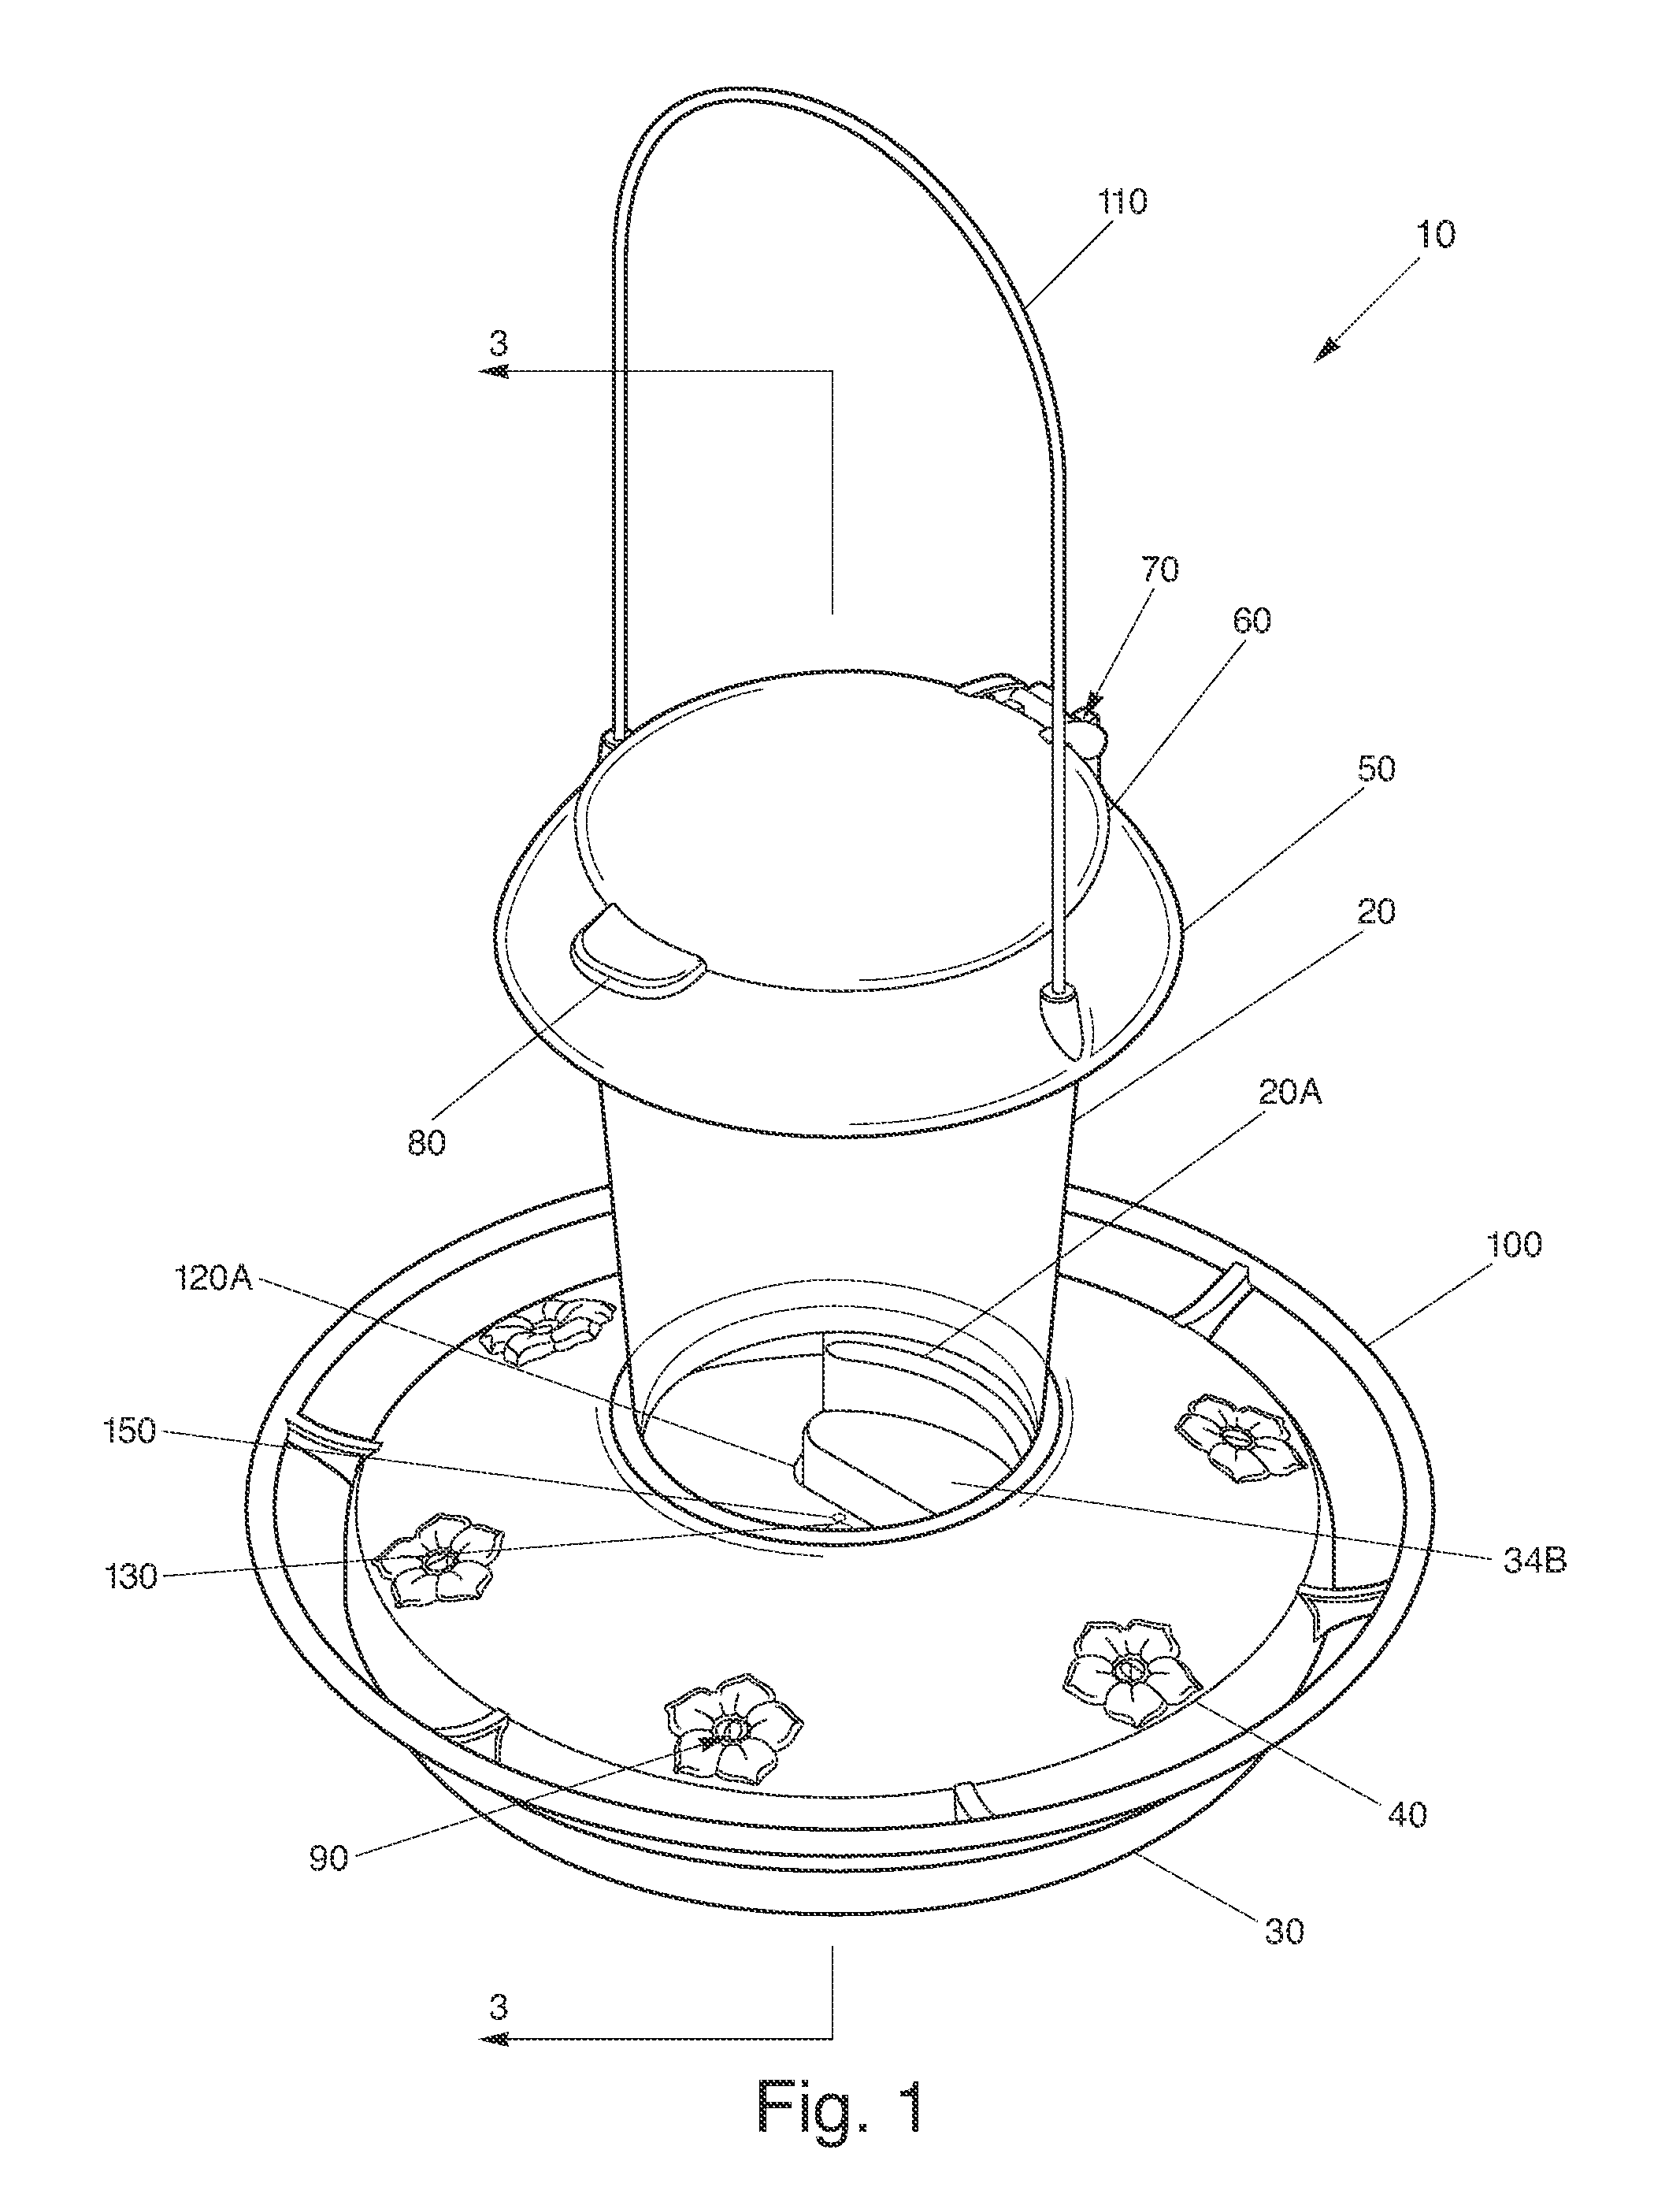 Nectar feeder with float and valve